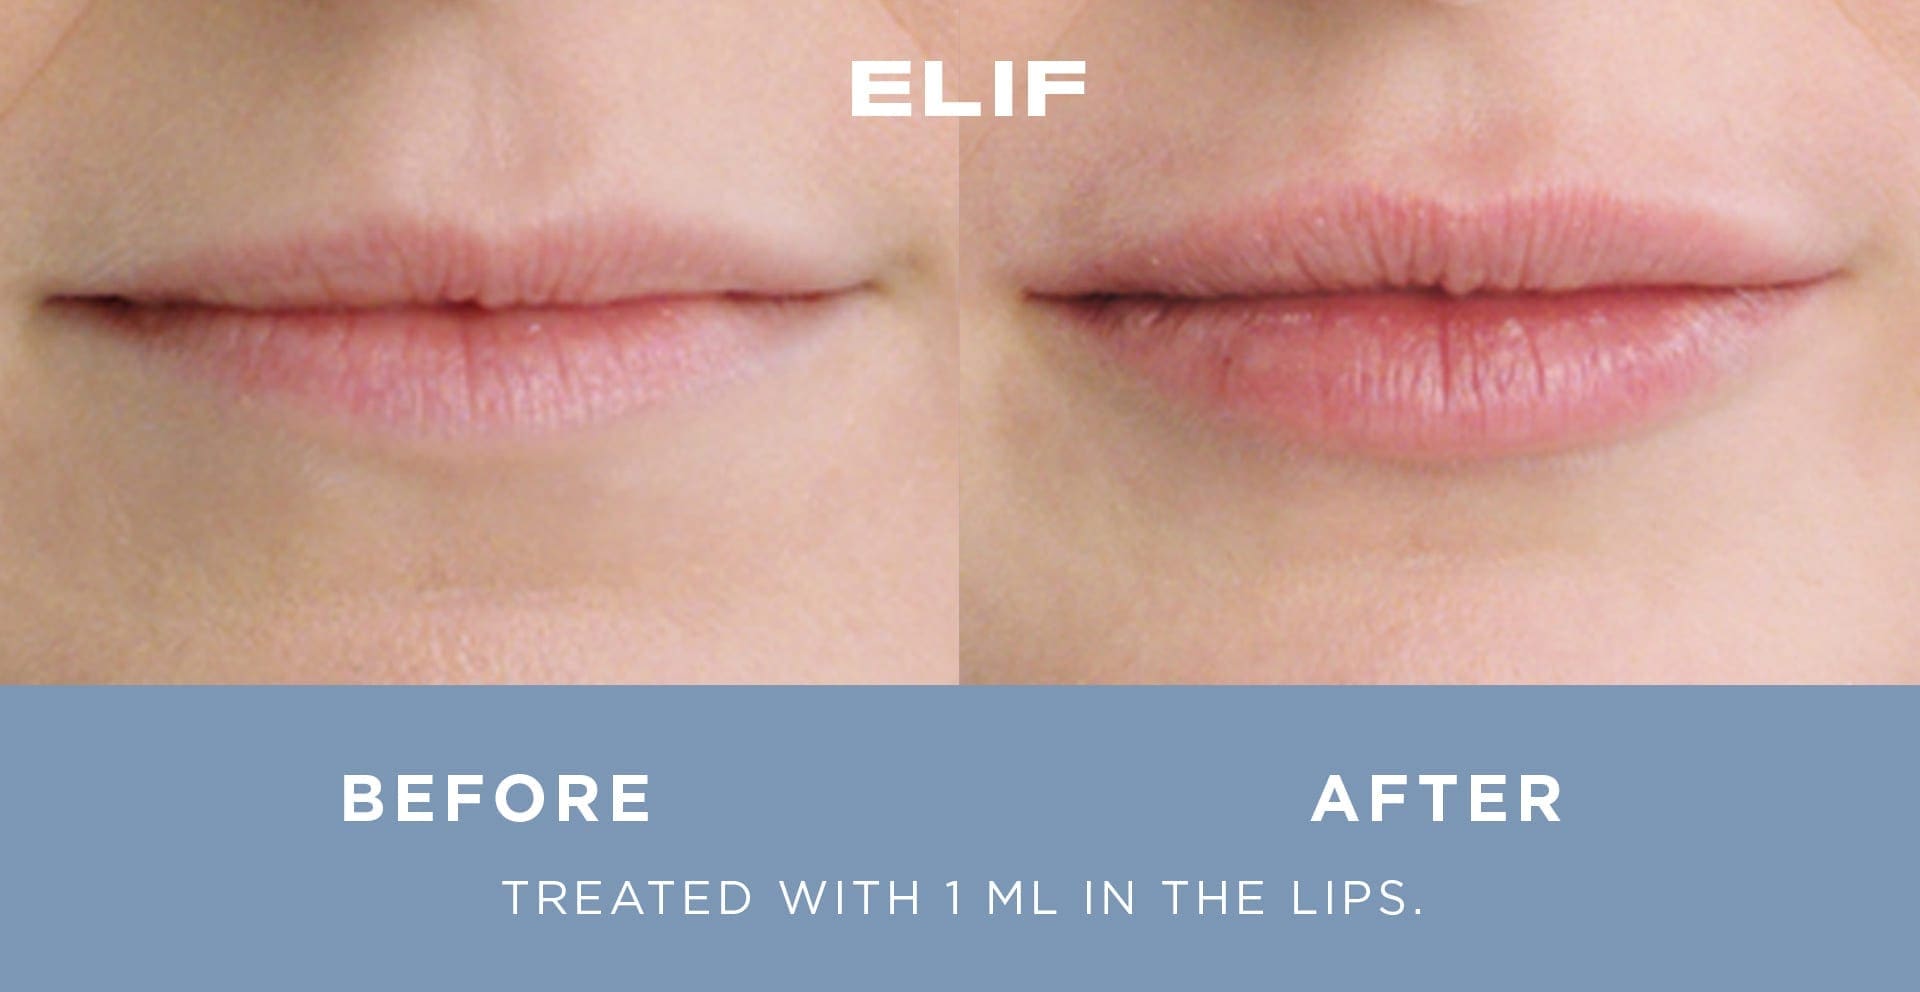 Side by side comparison of woman's lips